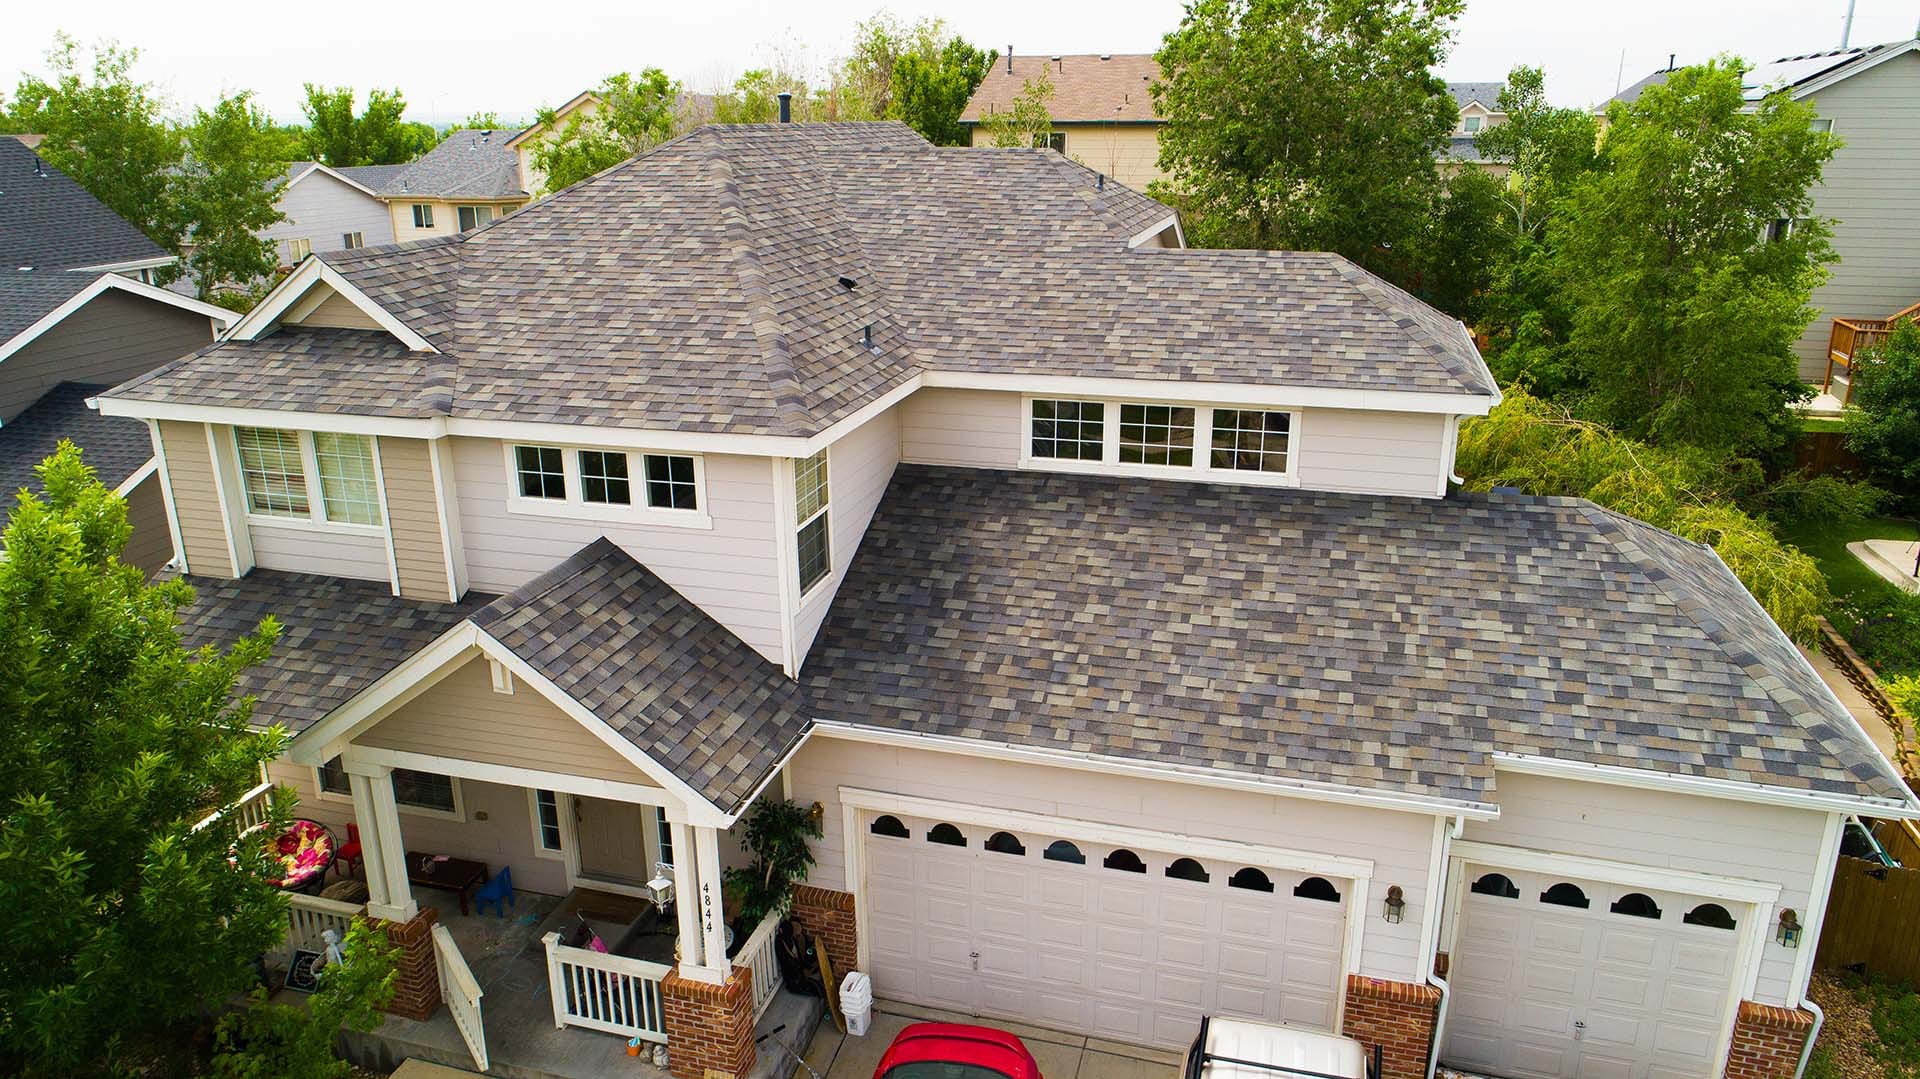 Large house asphalt shingle roofing installed by Northern Lights Exteriors